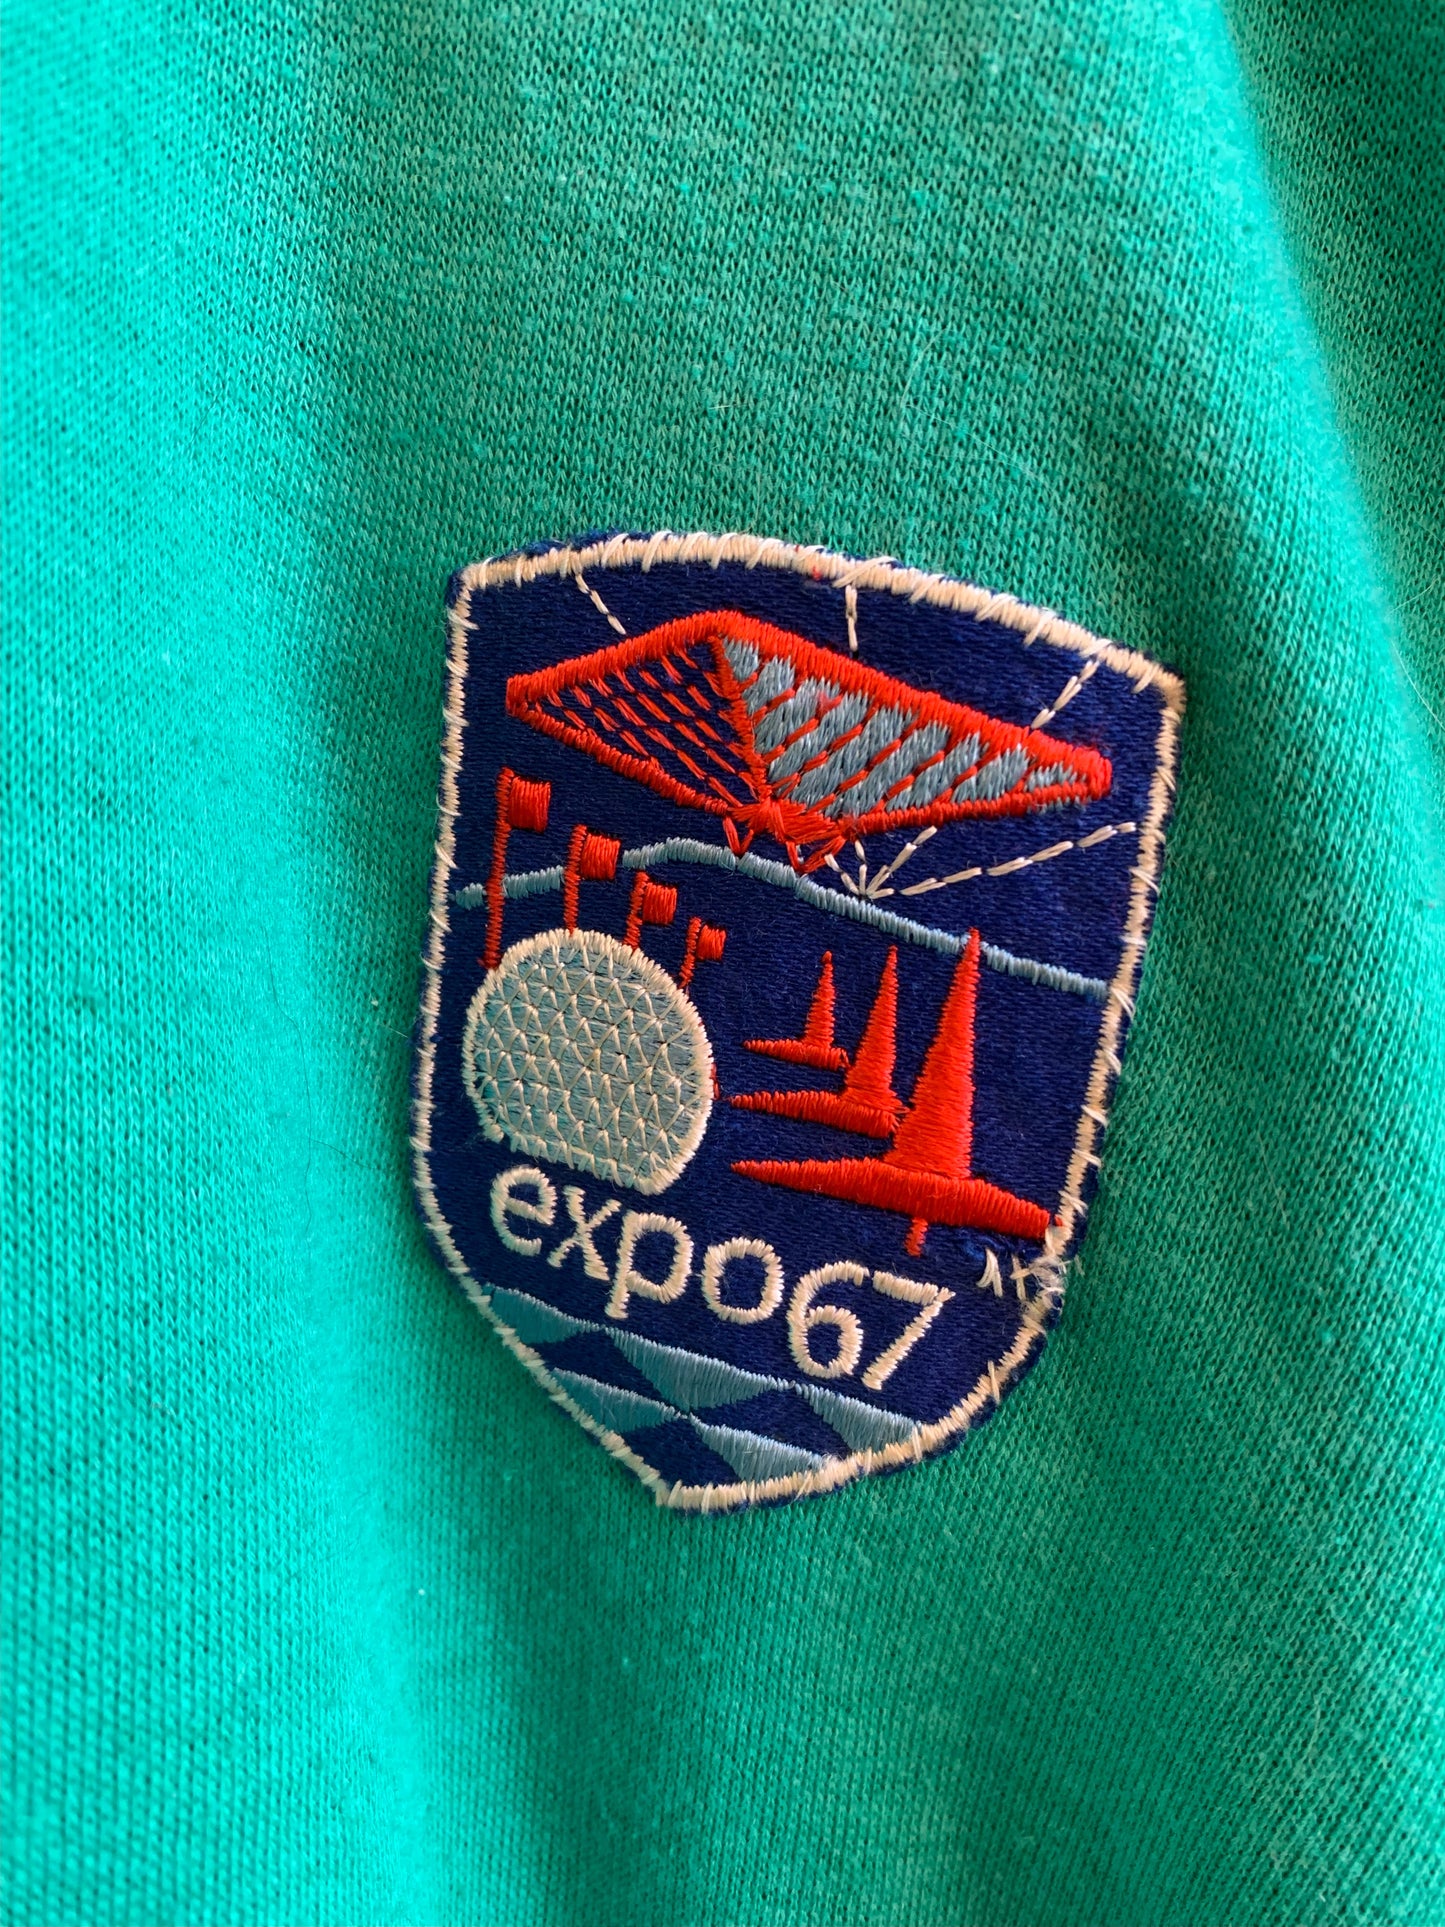 1980s Crewneck with 1960s Expo Patch